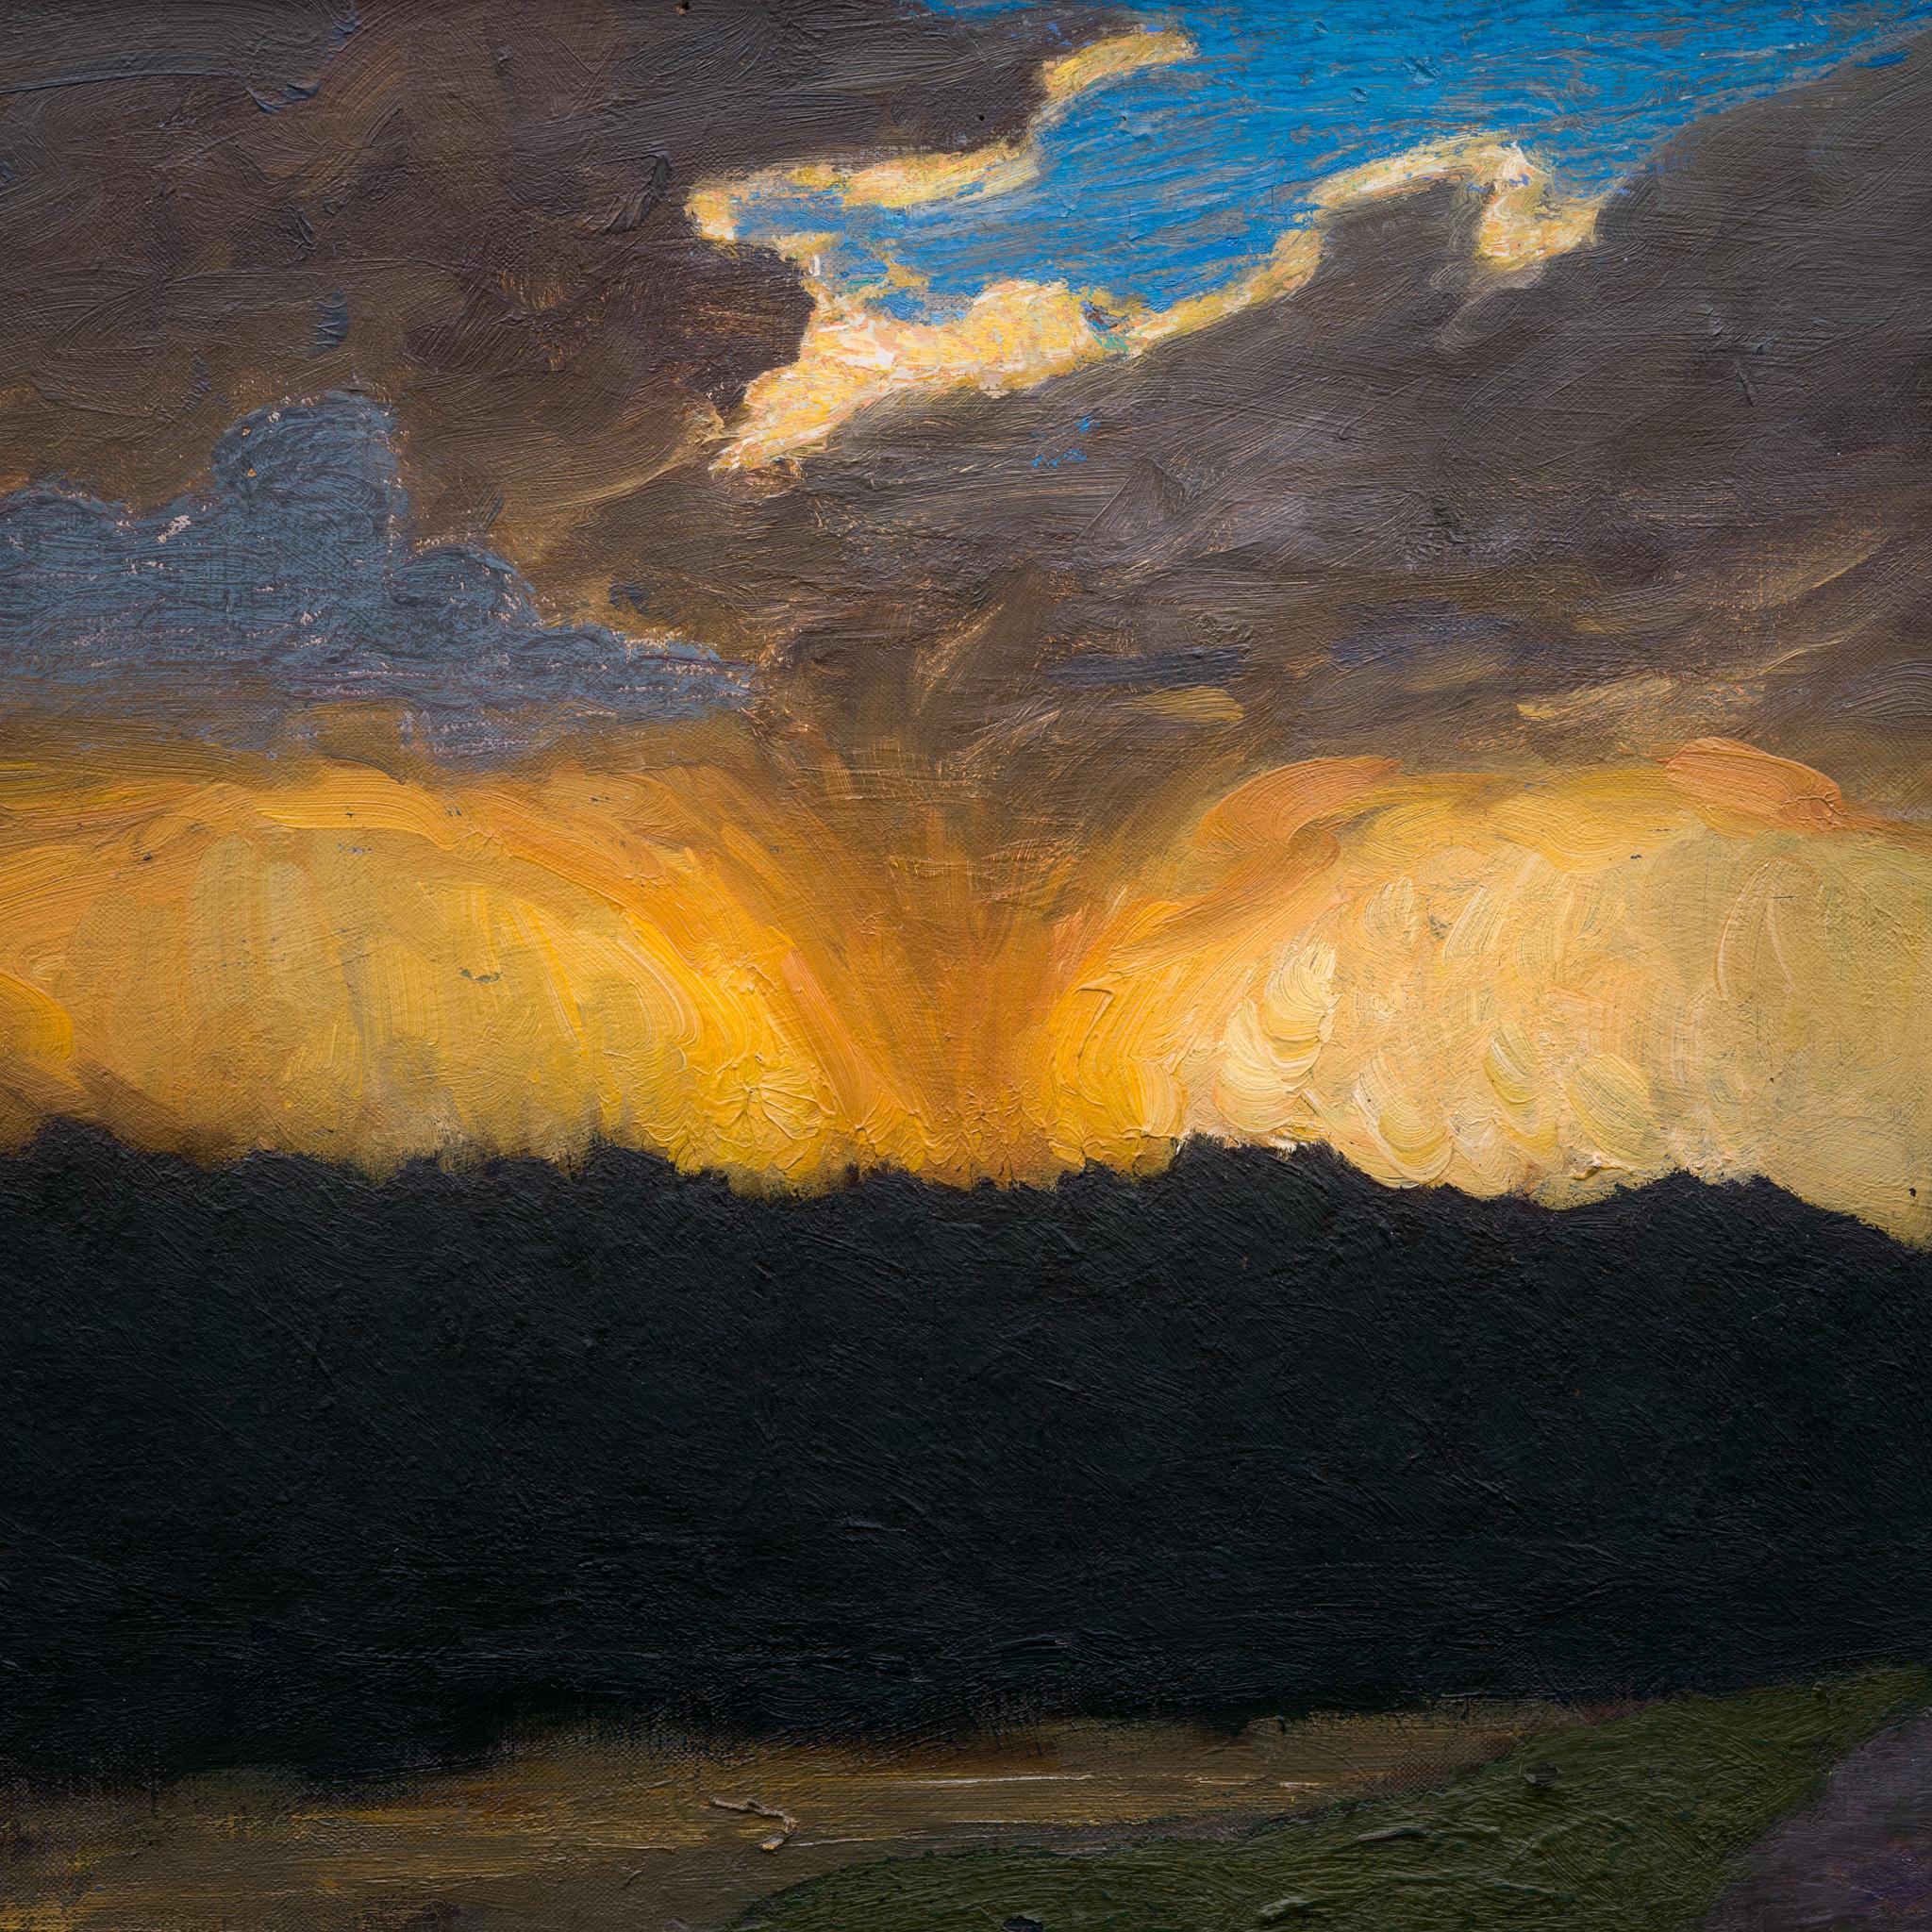 We have a stunning painting by the Swedish artist Pelle Swedlund (1865-1947) that is available for sale. The painting depicts a dramatic scene with a tornado at the center, surrounded by rain-filled clouds. The sky is glowing in shades of yellow,